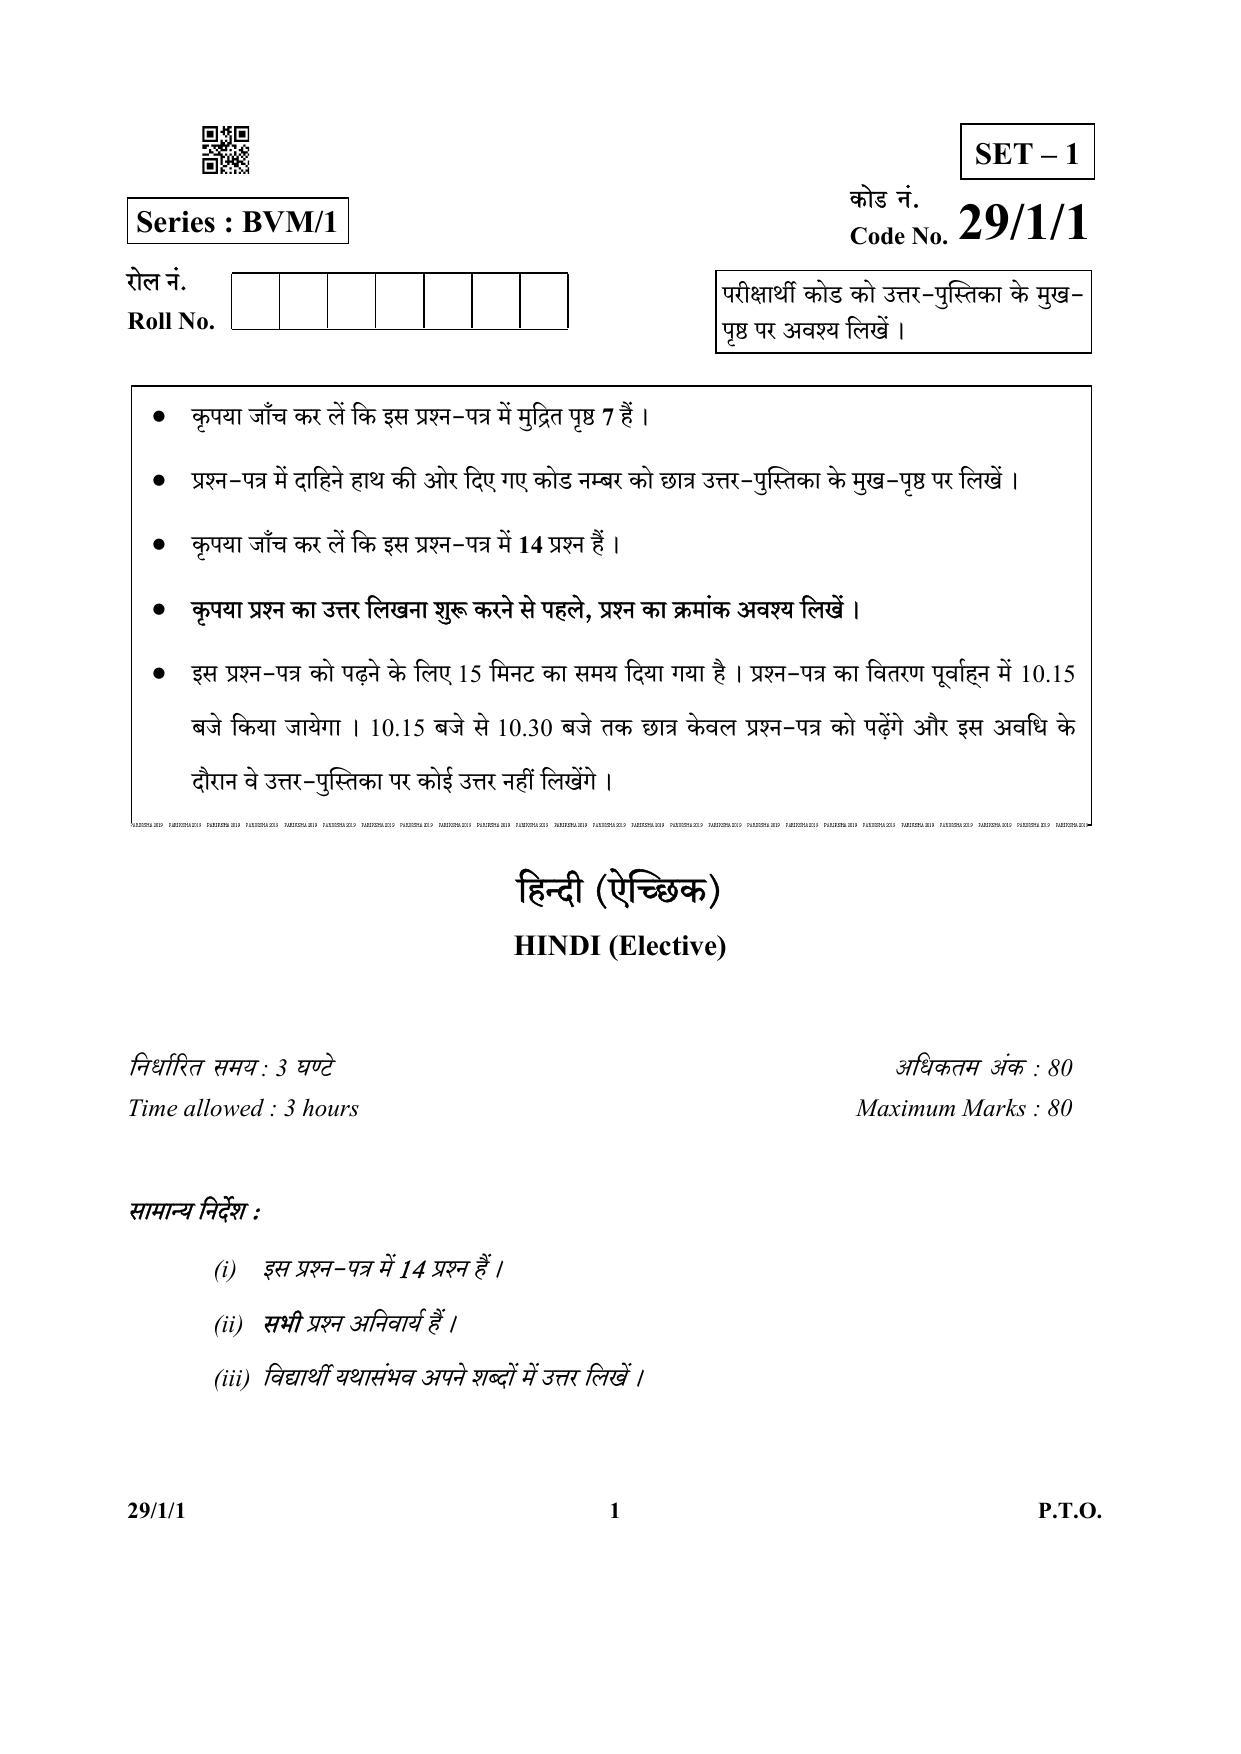 CBSE Class 12 29-1-1 (Hindi ELECTIVE) 2019 Question Paper - Page 1